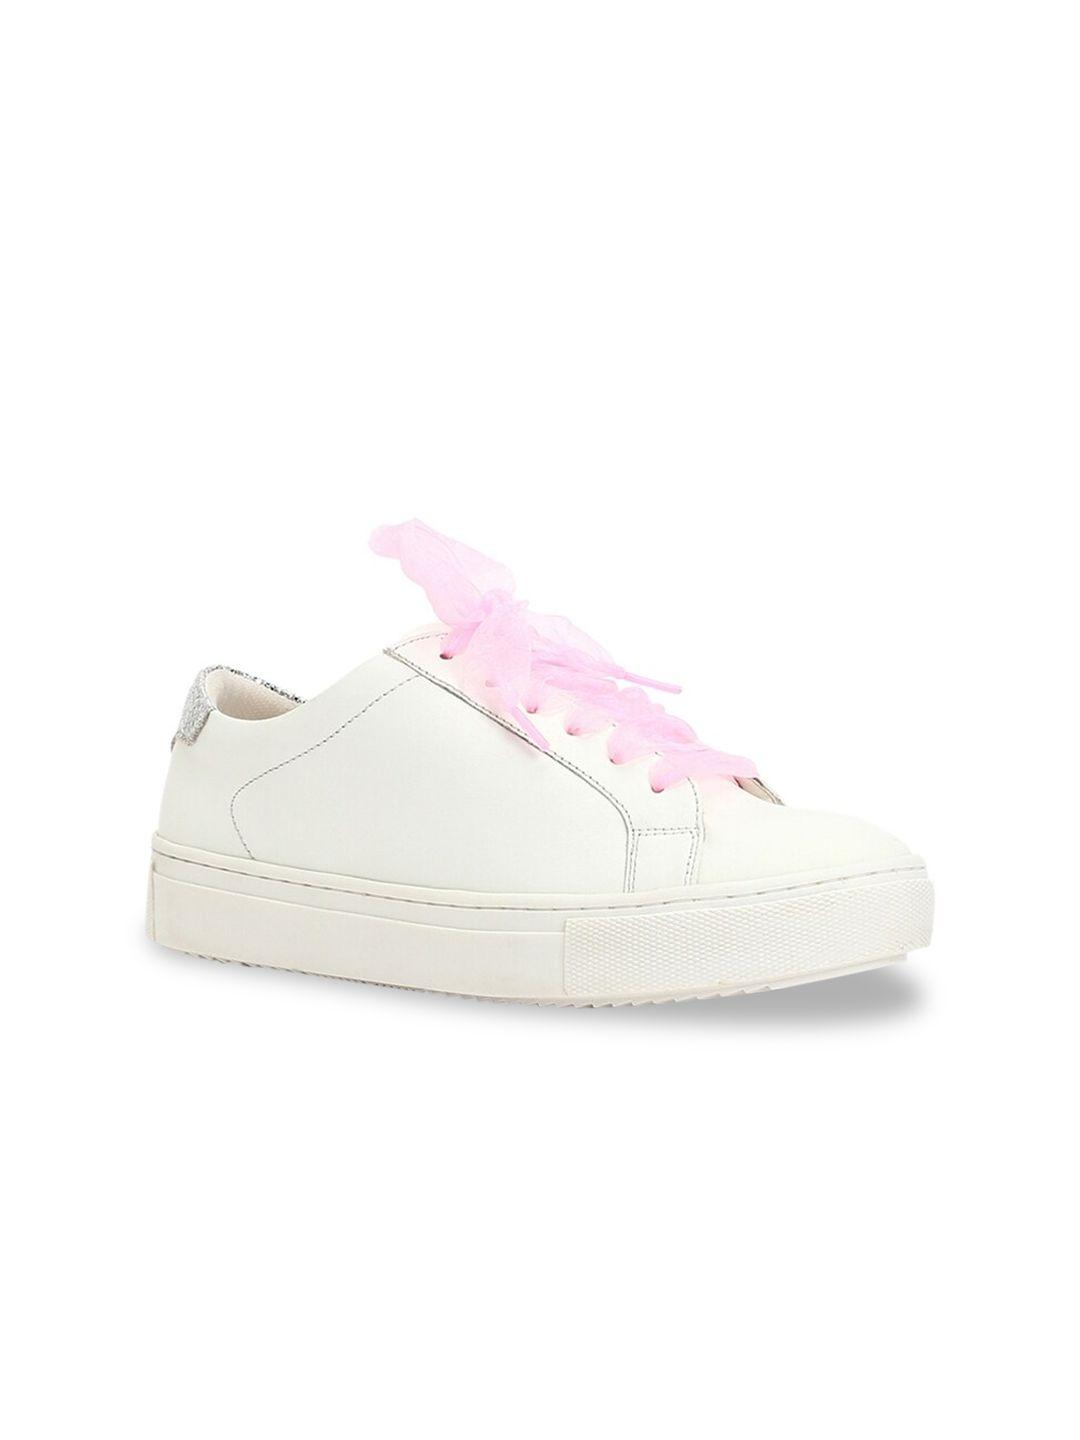 forever-21-women-white-solid-sneakers